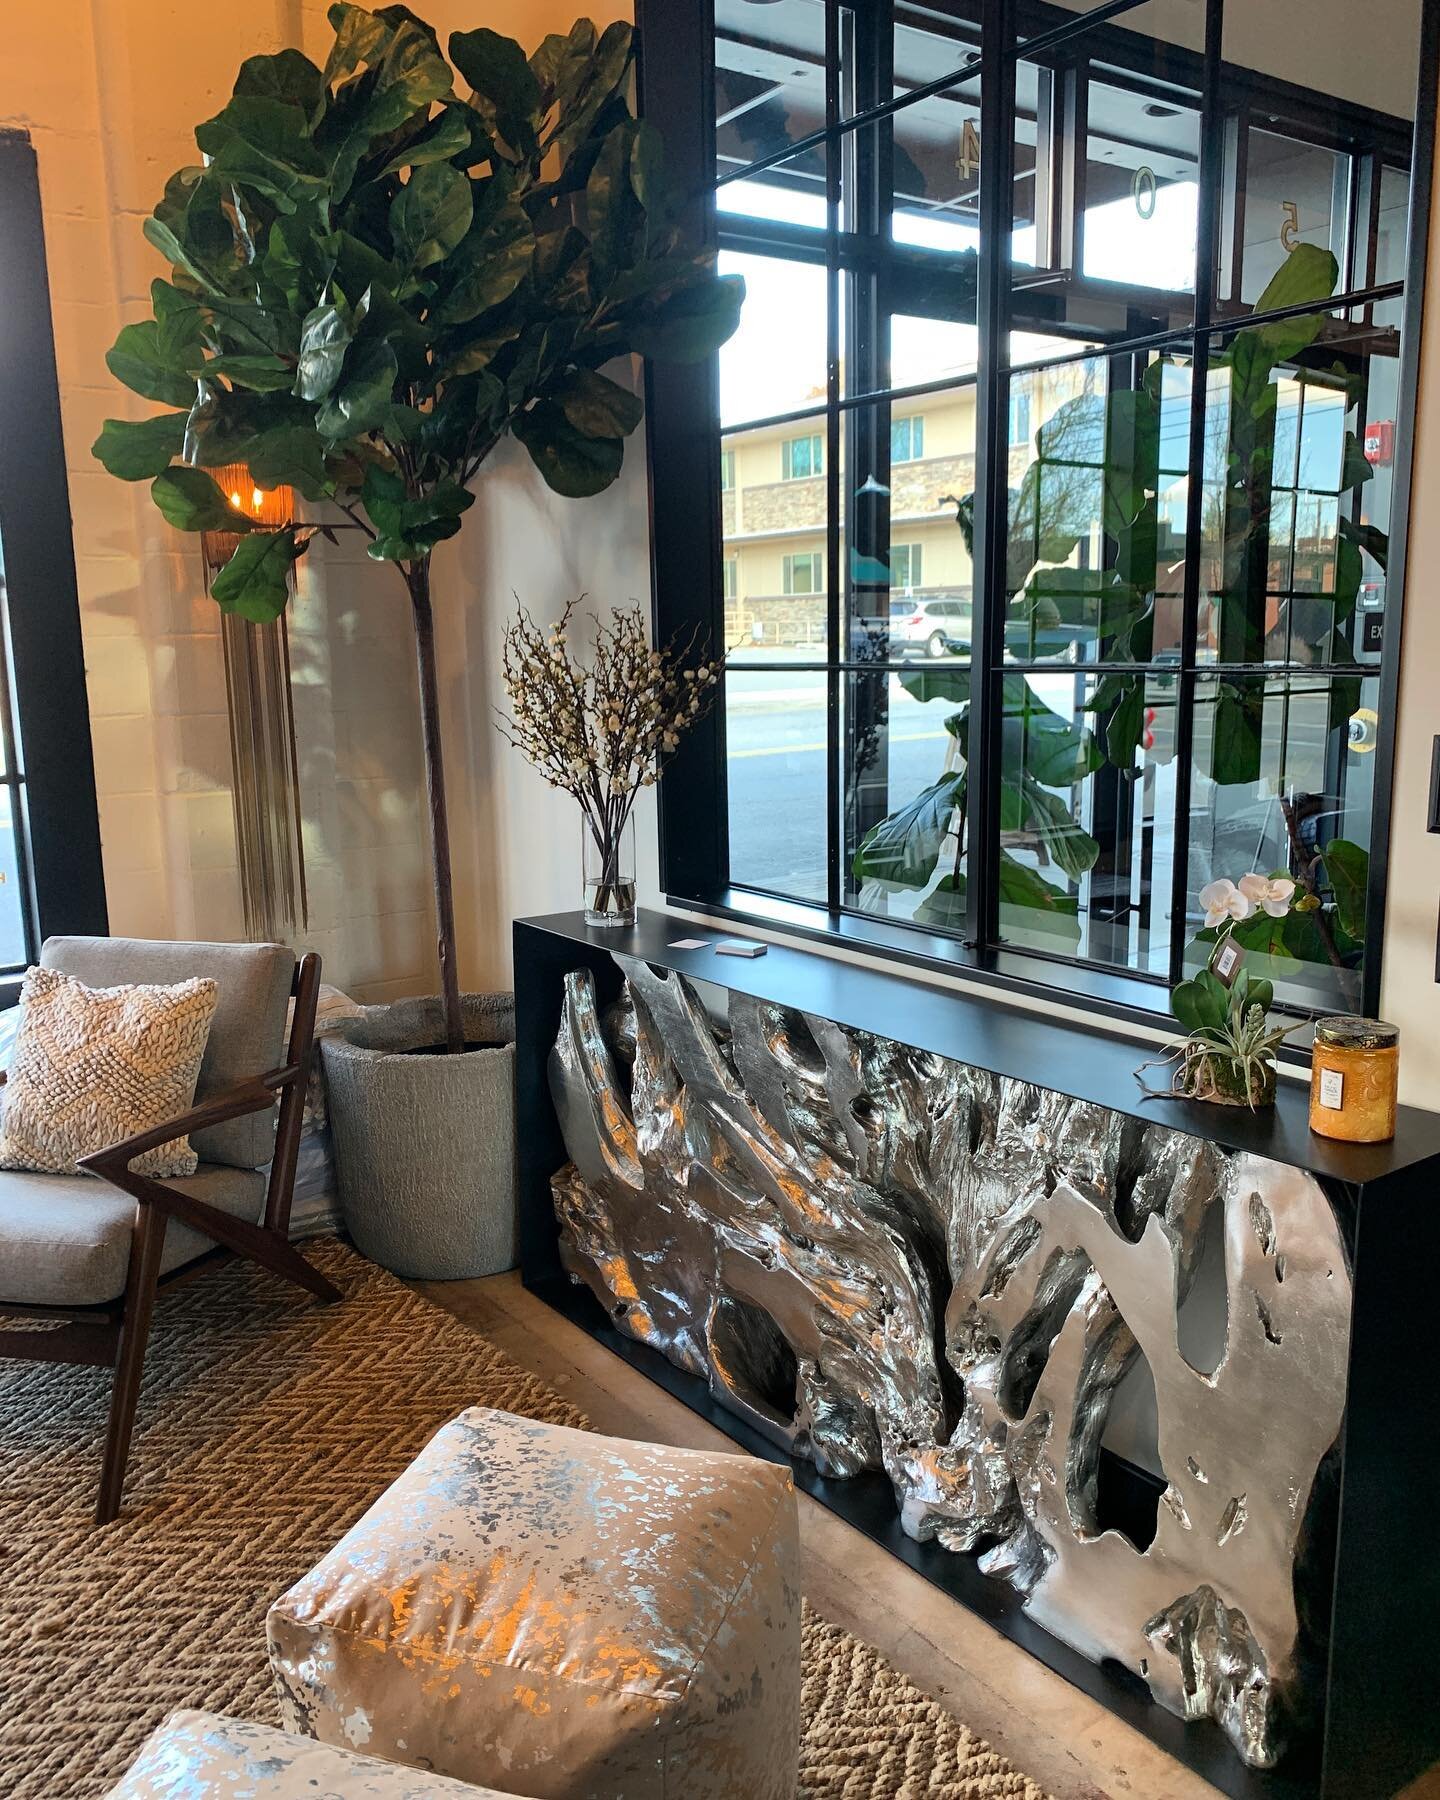 Out with the old, in with the new! We LOVE getting new stuff to show off 🤩 #kloverfineinteriors #interiordesign #cda #lakecda #rockfordbuilding